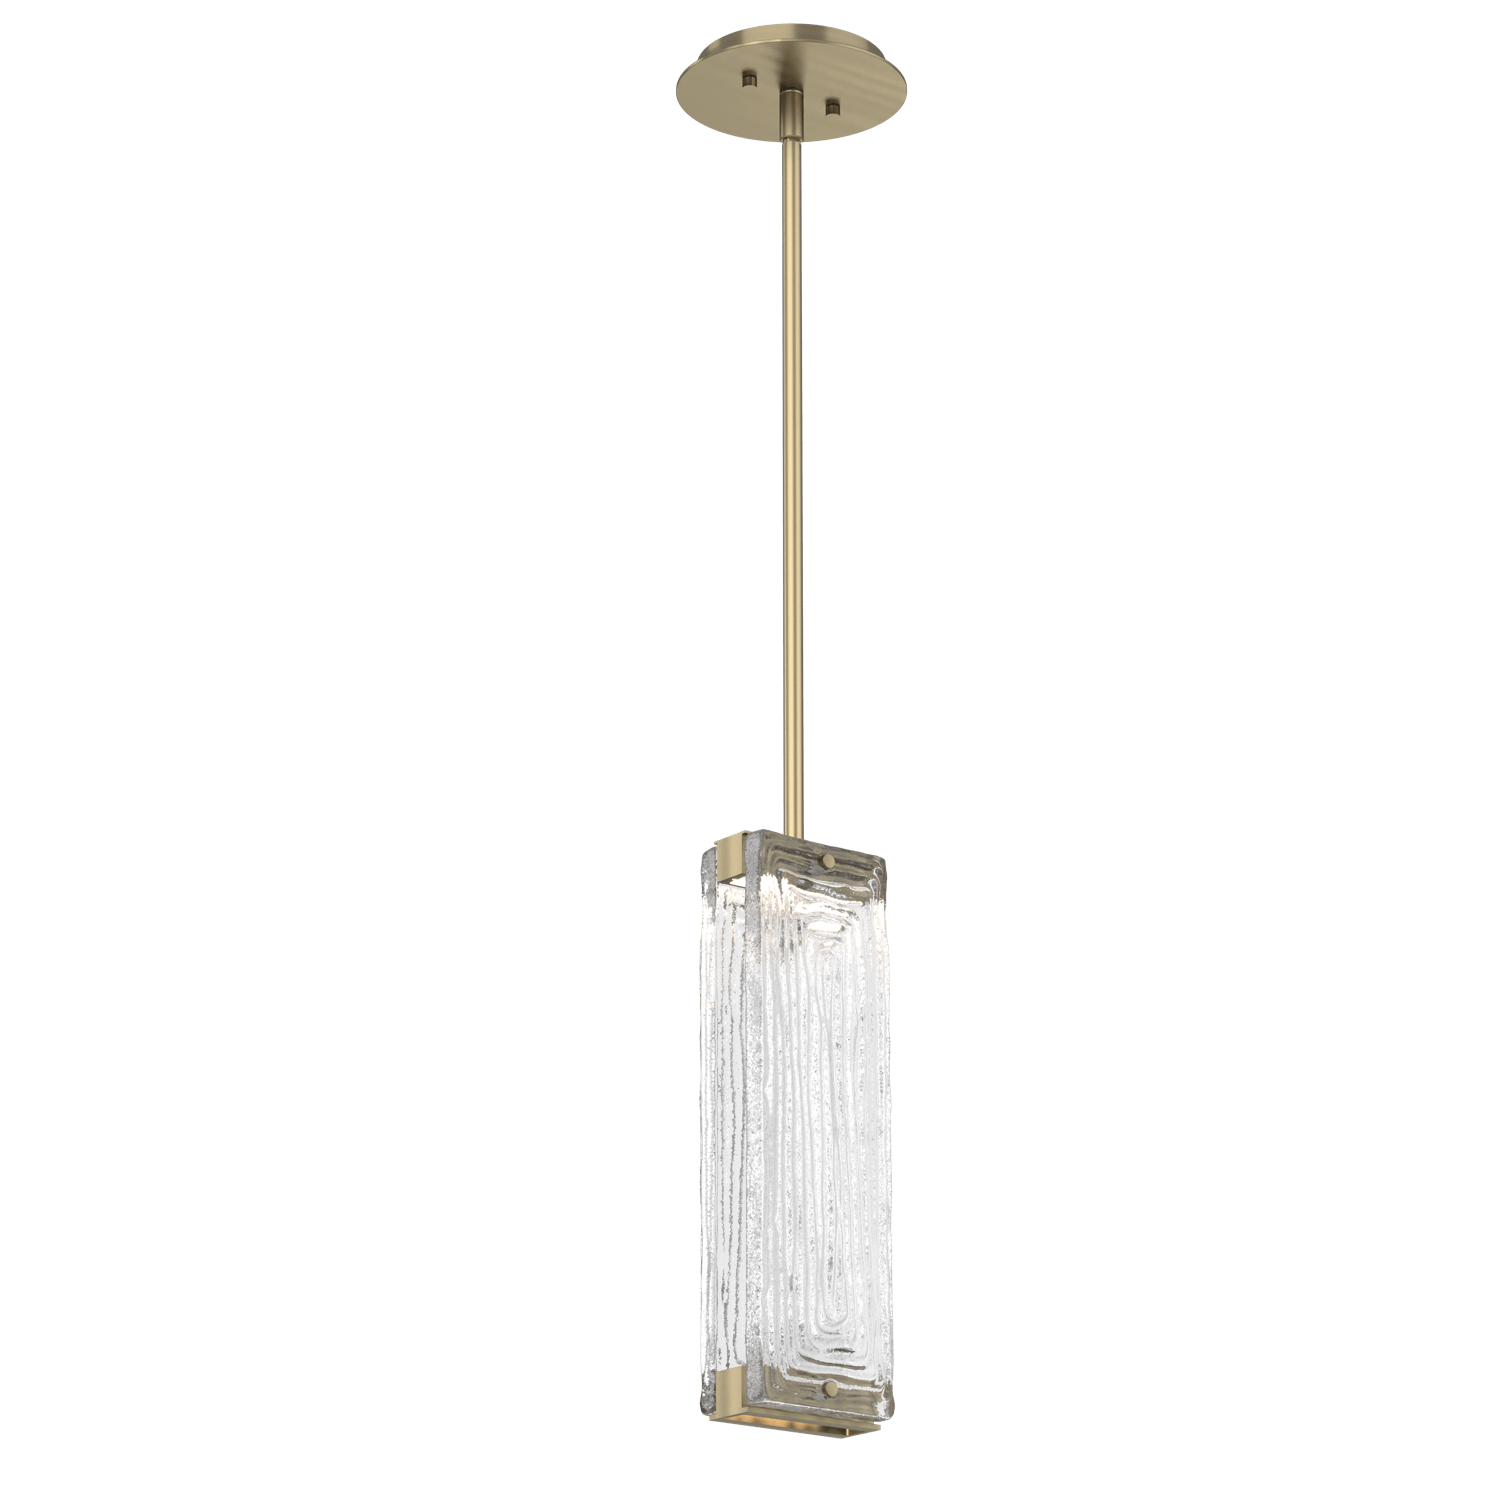 LAB0090-01-HB-TL-Hammerton-Studio-Tabulo-pendant-light-with-heritage-brass-finish-and-clear-linea-cast-glass-shade-and-LED-lamping